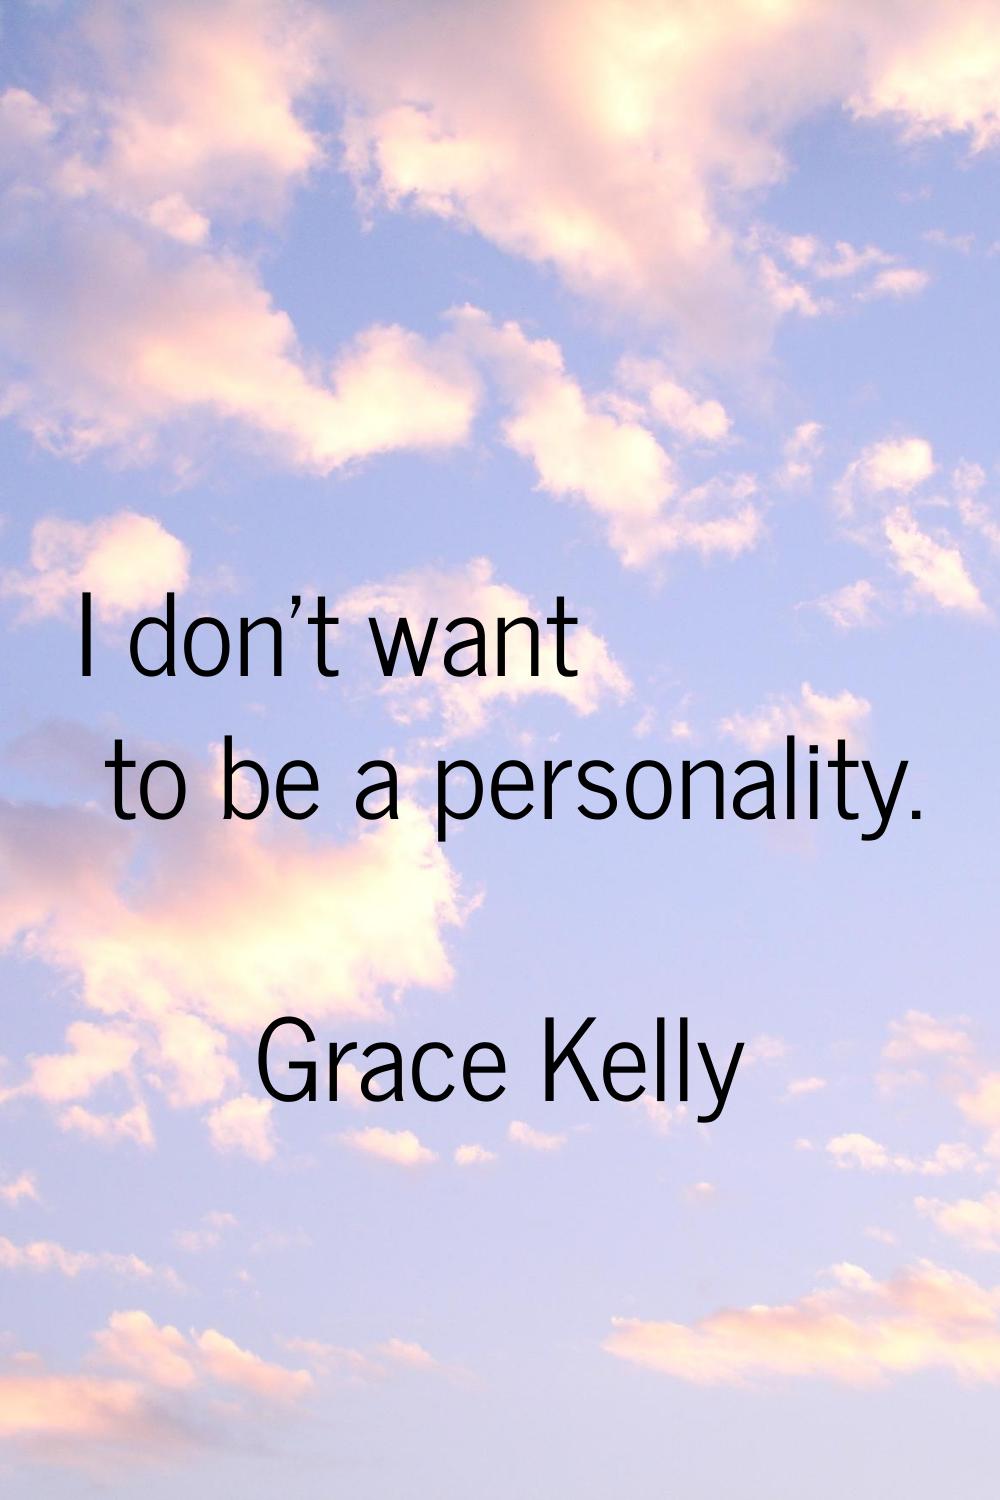 I don't want to be a personality.